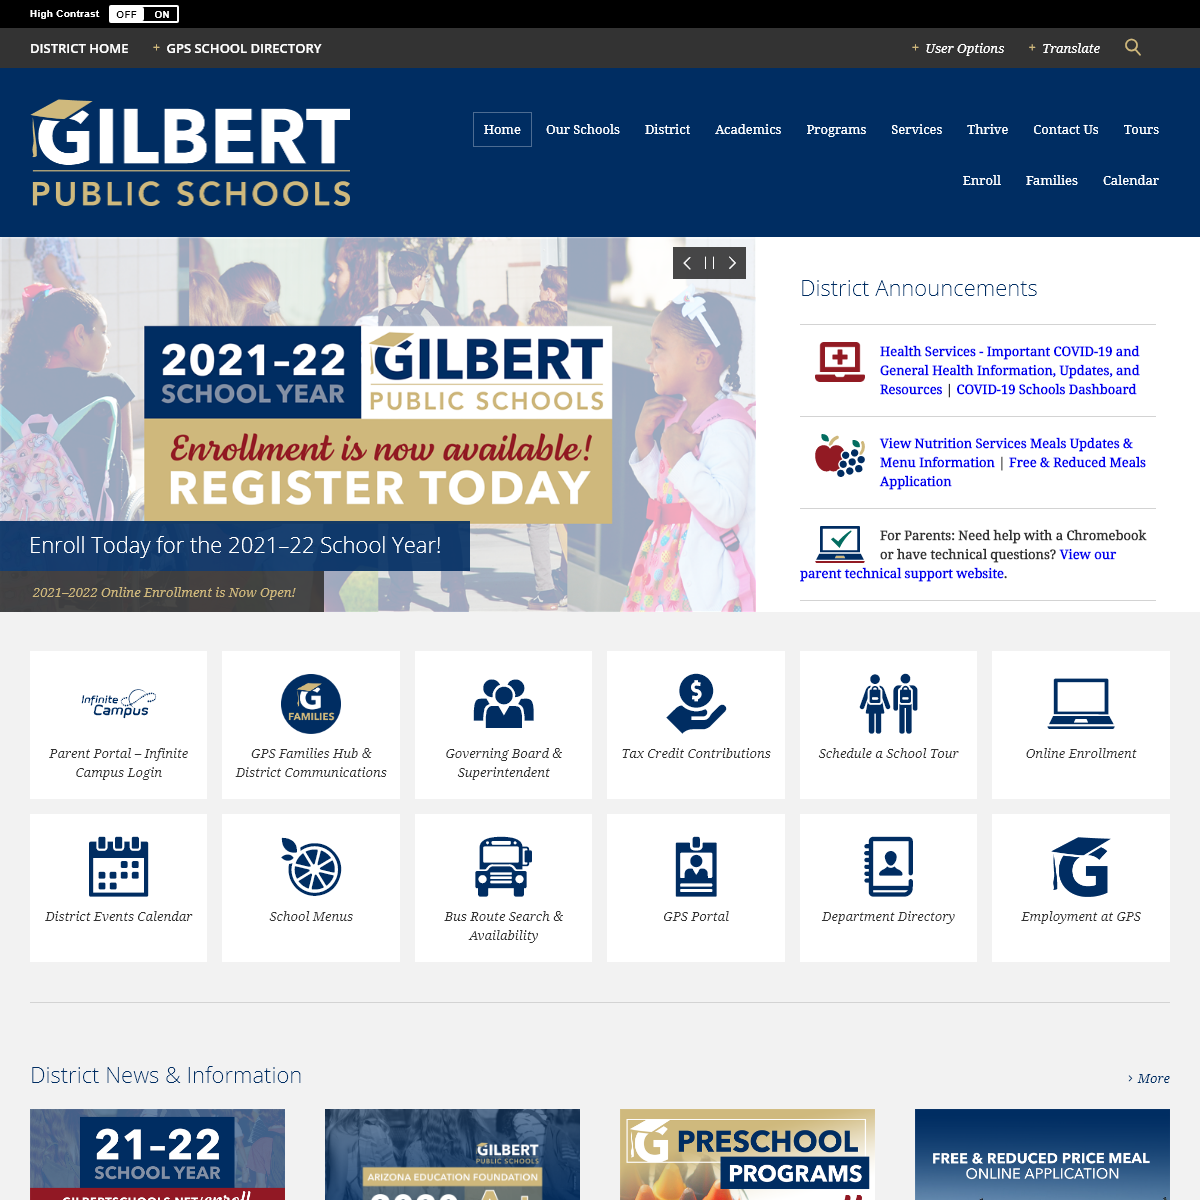 A complete backup of gilbertschools.net